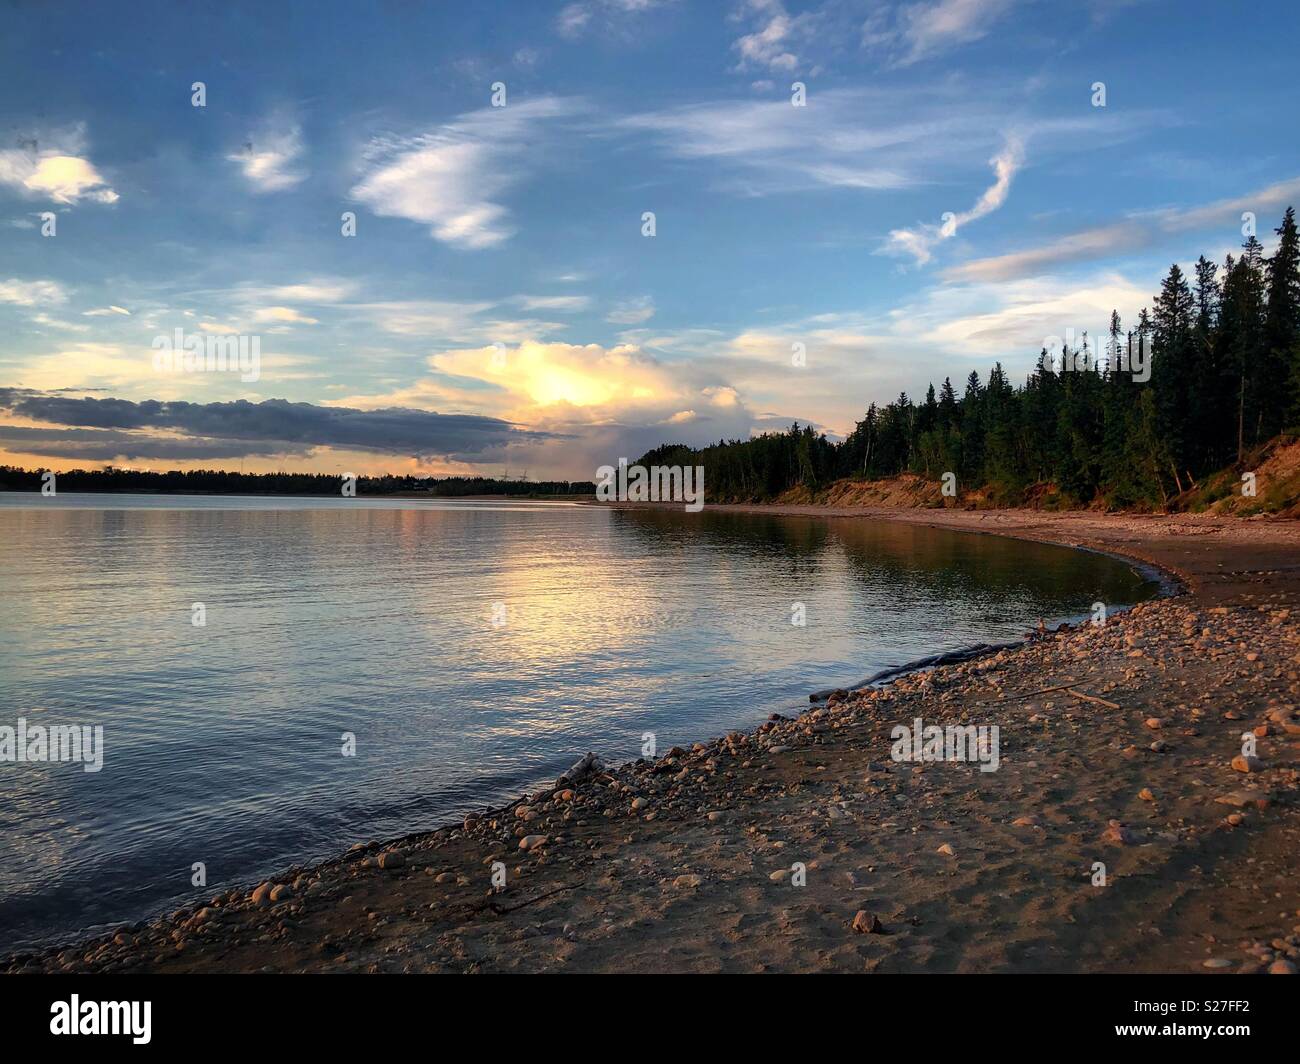 Sunset on Alberta lake with rocky and sandy beach. Spruce treeline in background. Calm blue waters with bright blue sky behind. Few clouds. Stock Photo